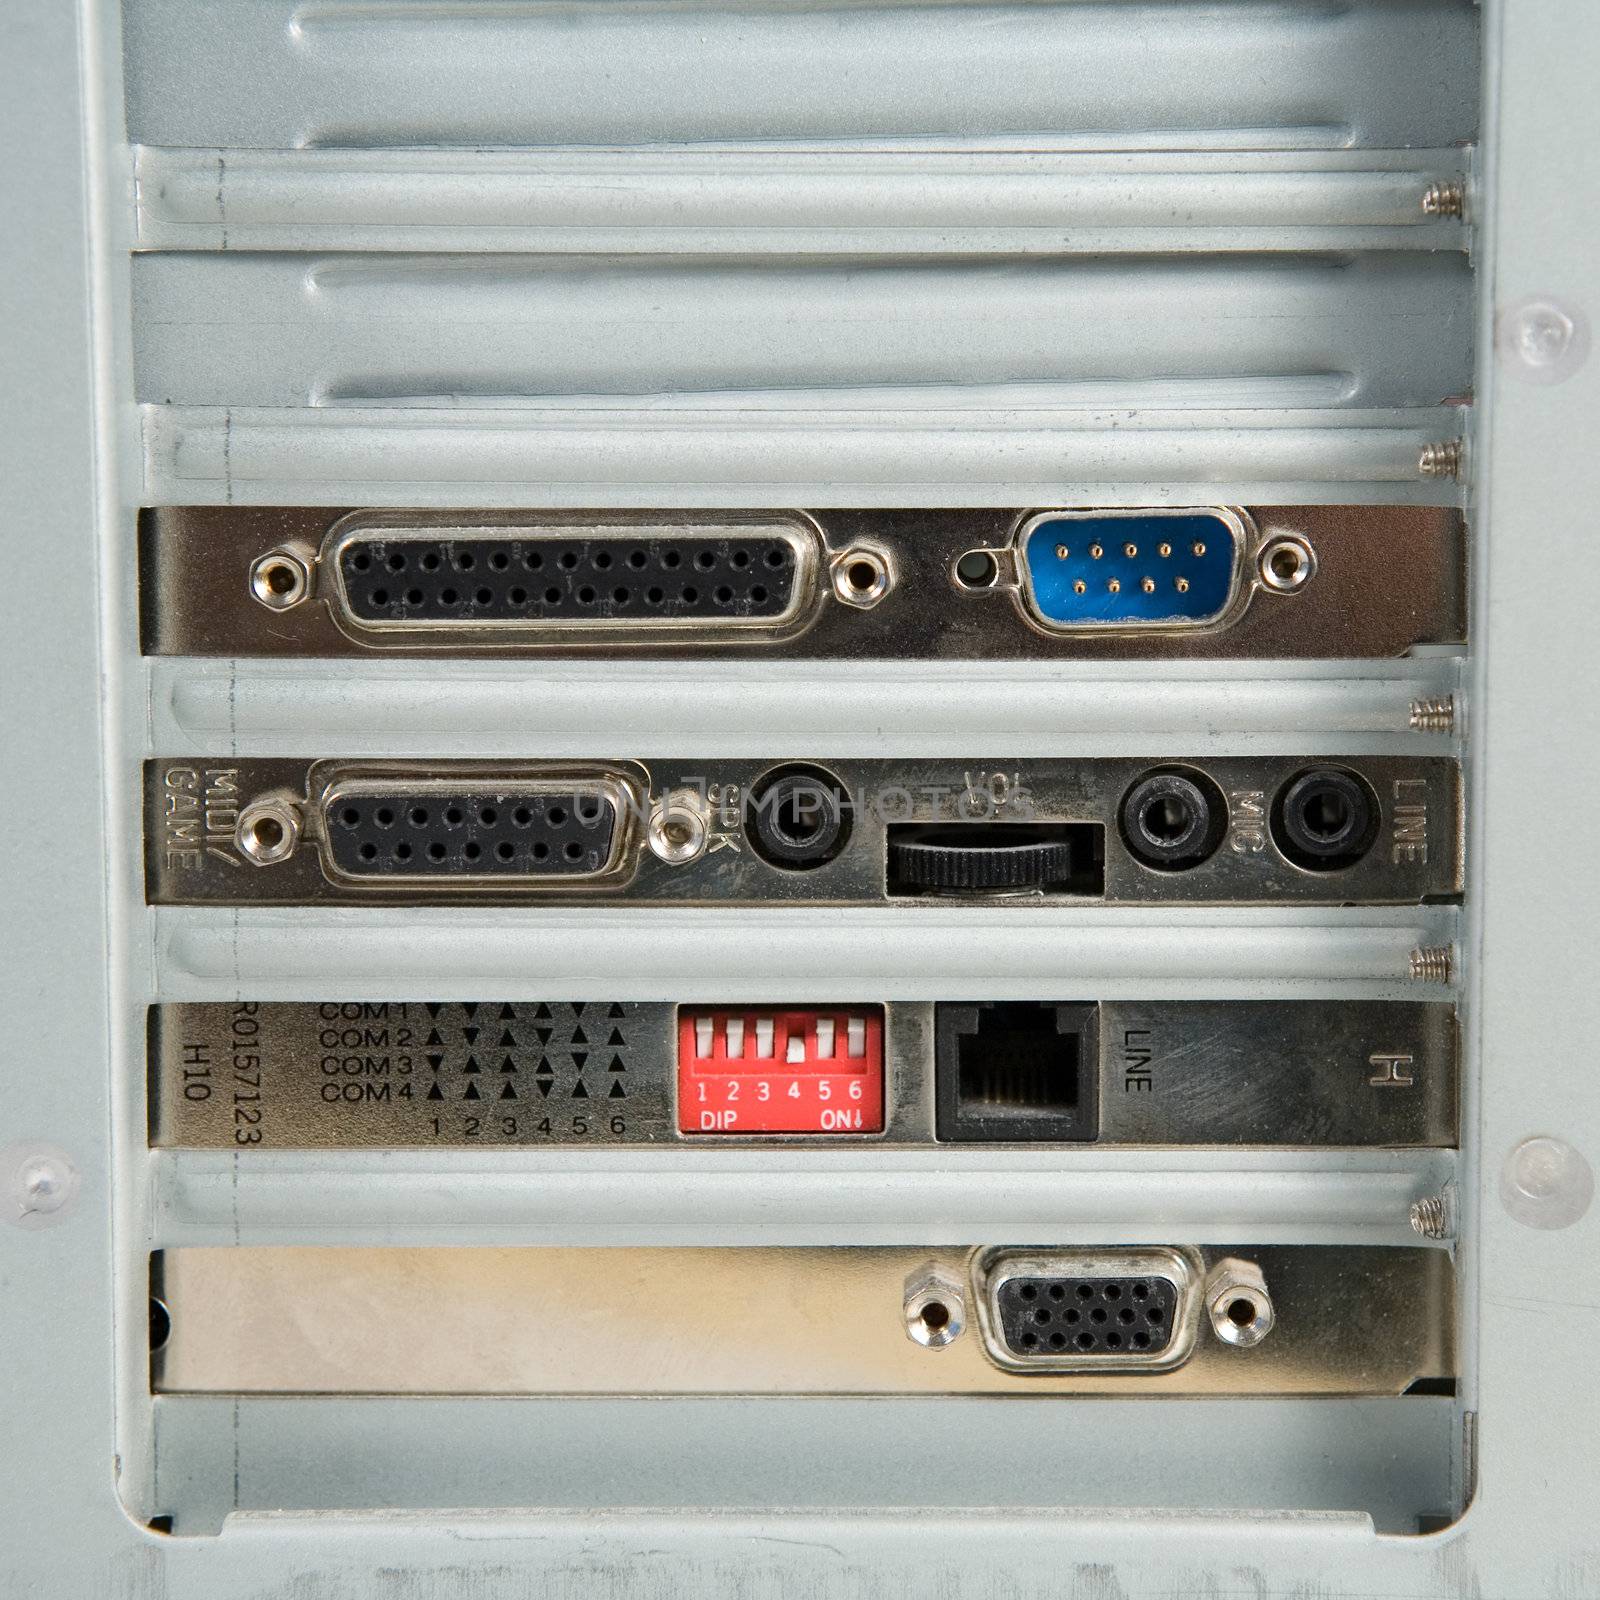 Card slots of a personal computer. Four cards installed, two slots free.